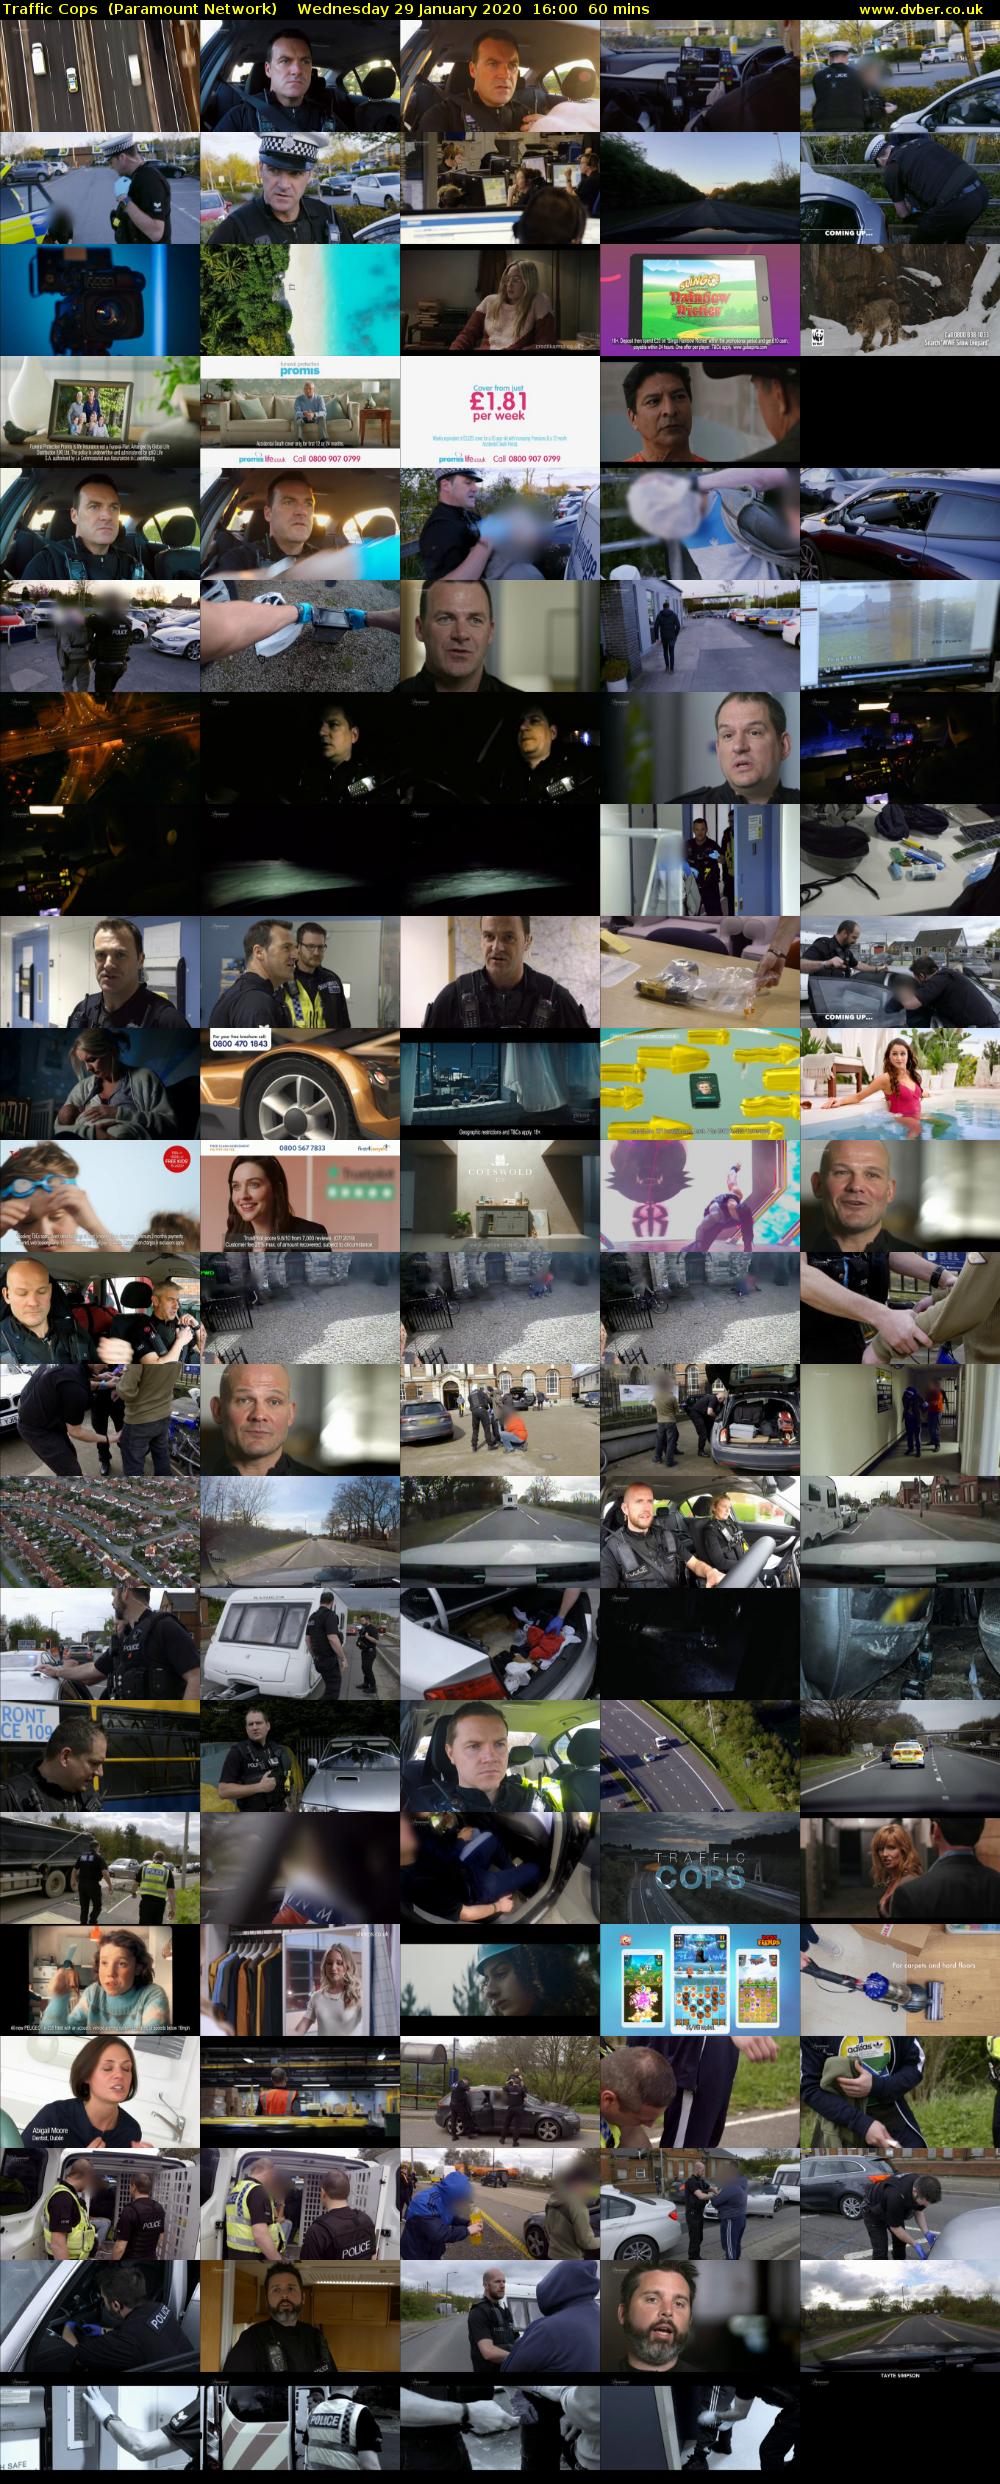 Traffic Cops  (Paramount Network) Wednesday 29 January 2020 16:00 - 17:00